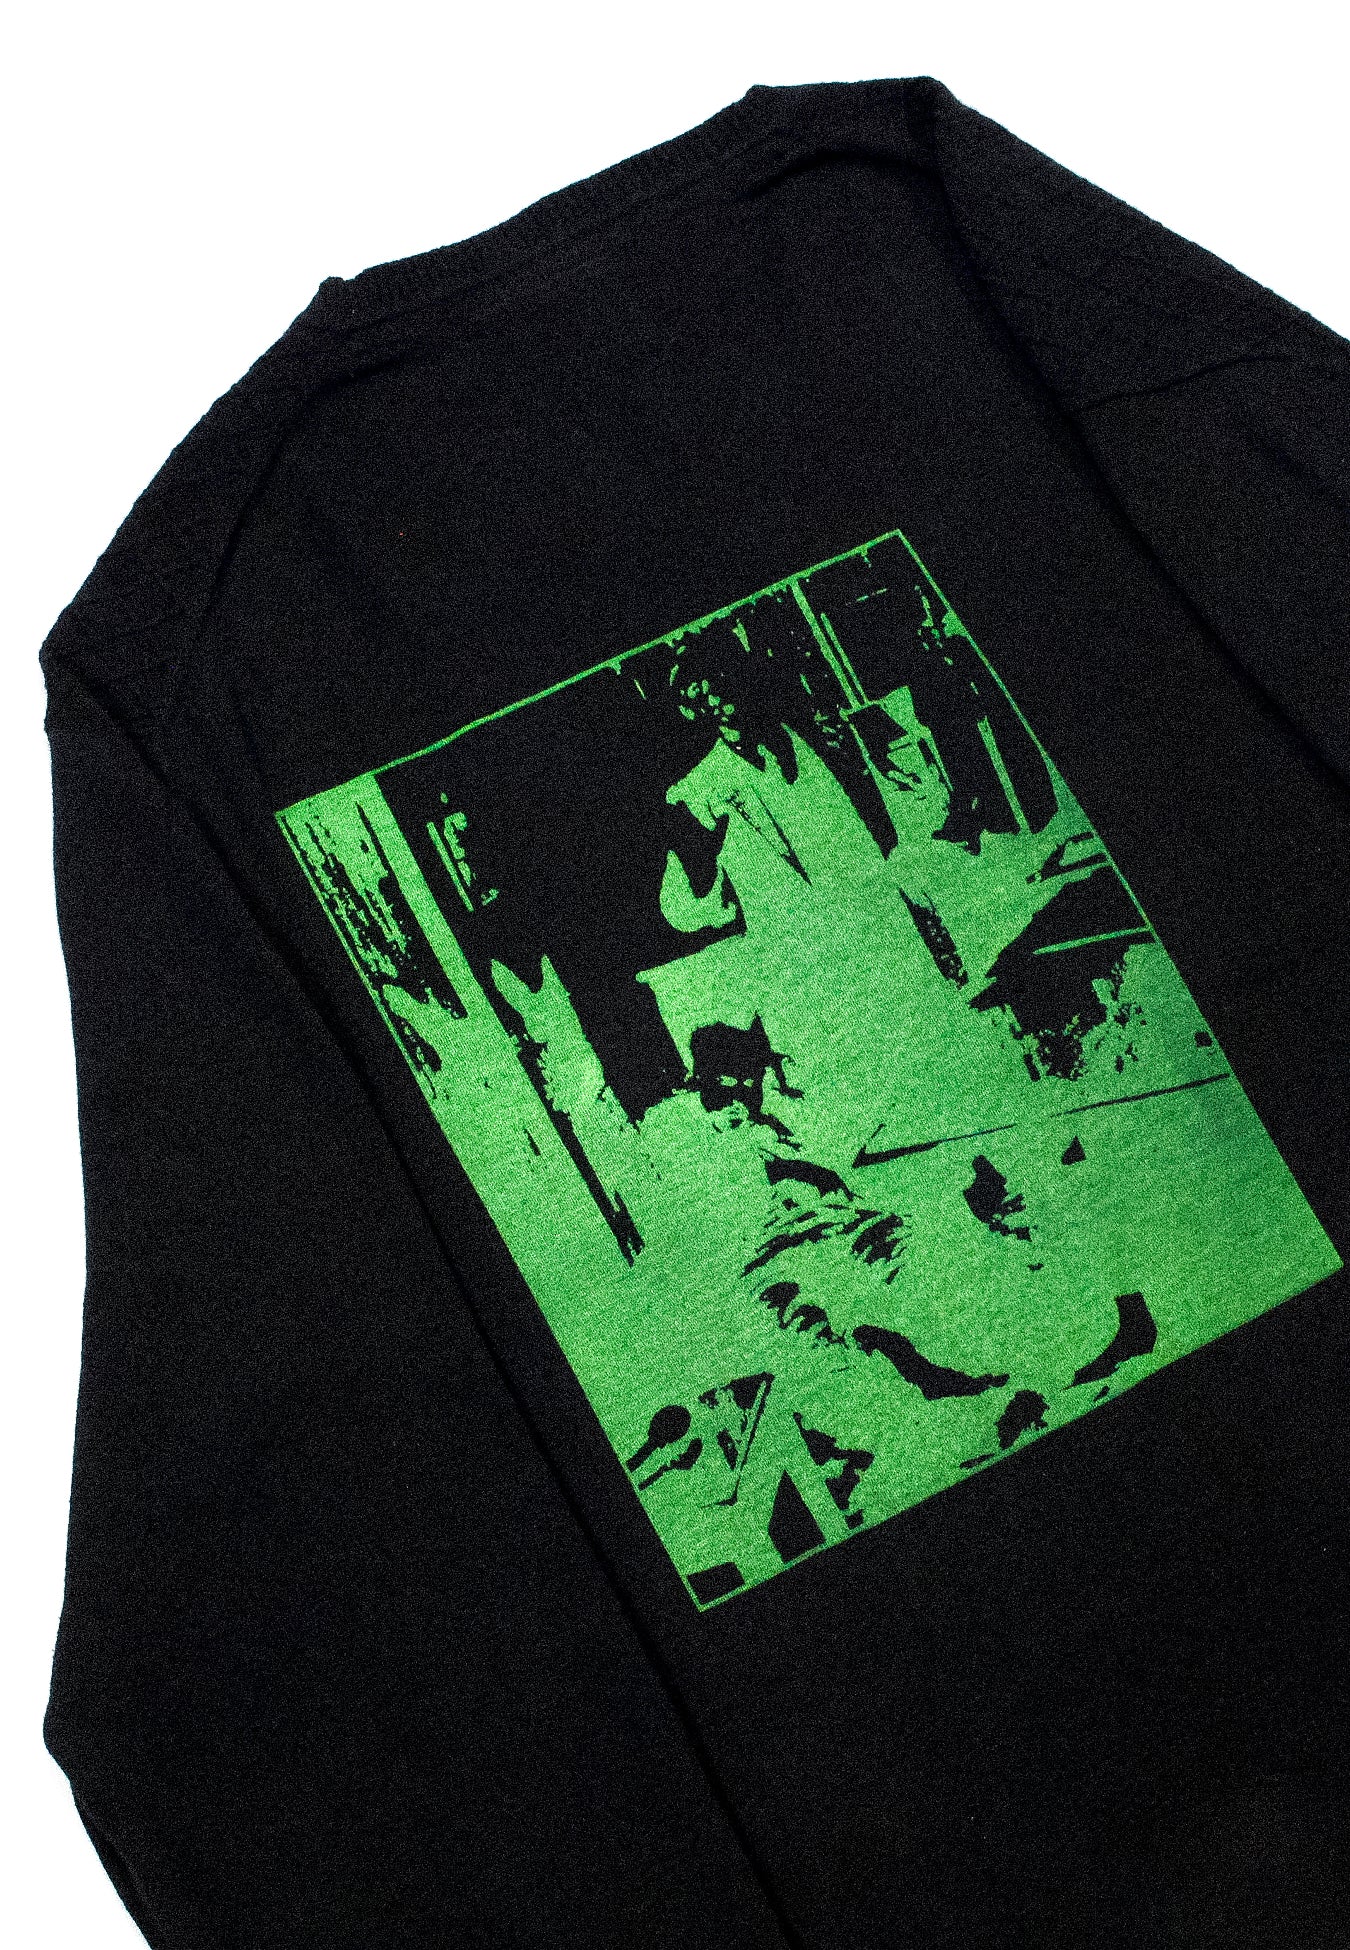 "GREEN SUICIDE//DIE LIKE DWYER" Pullover Sweater (XL)